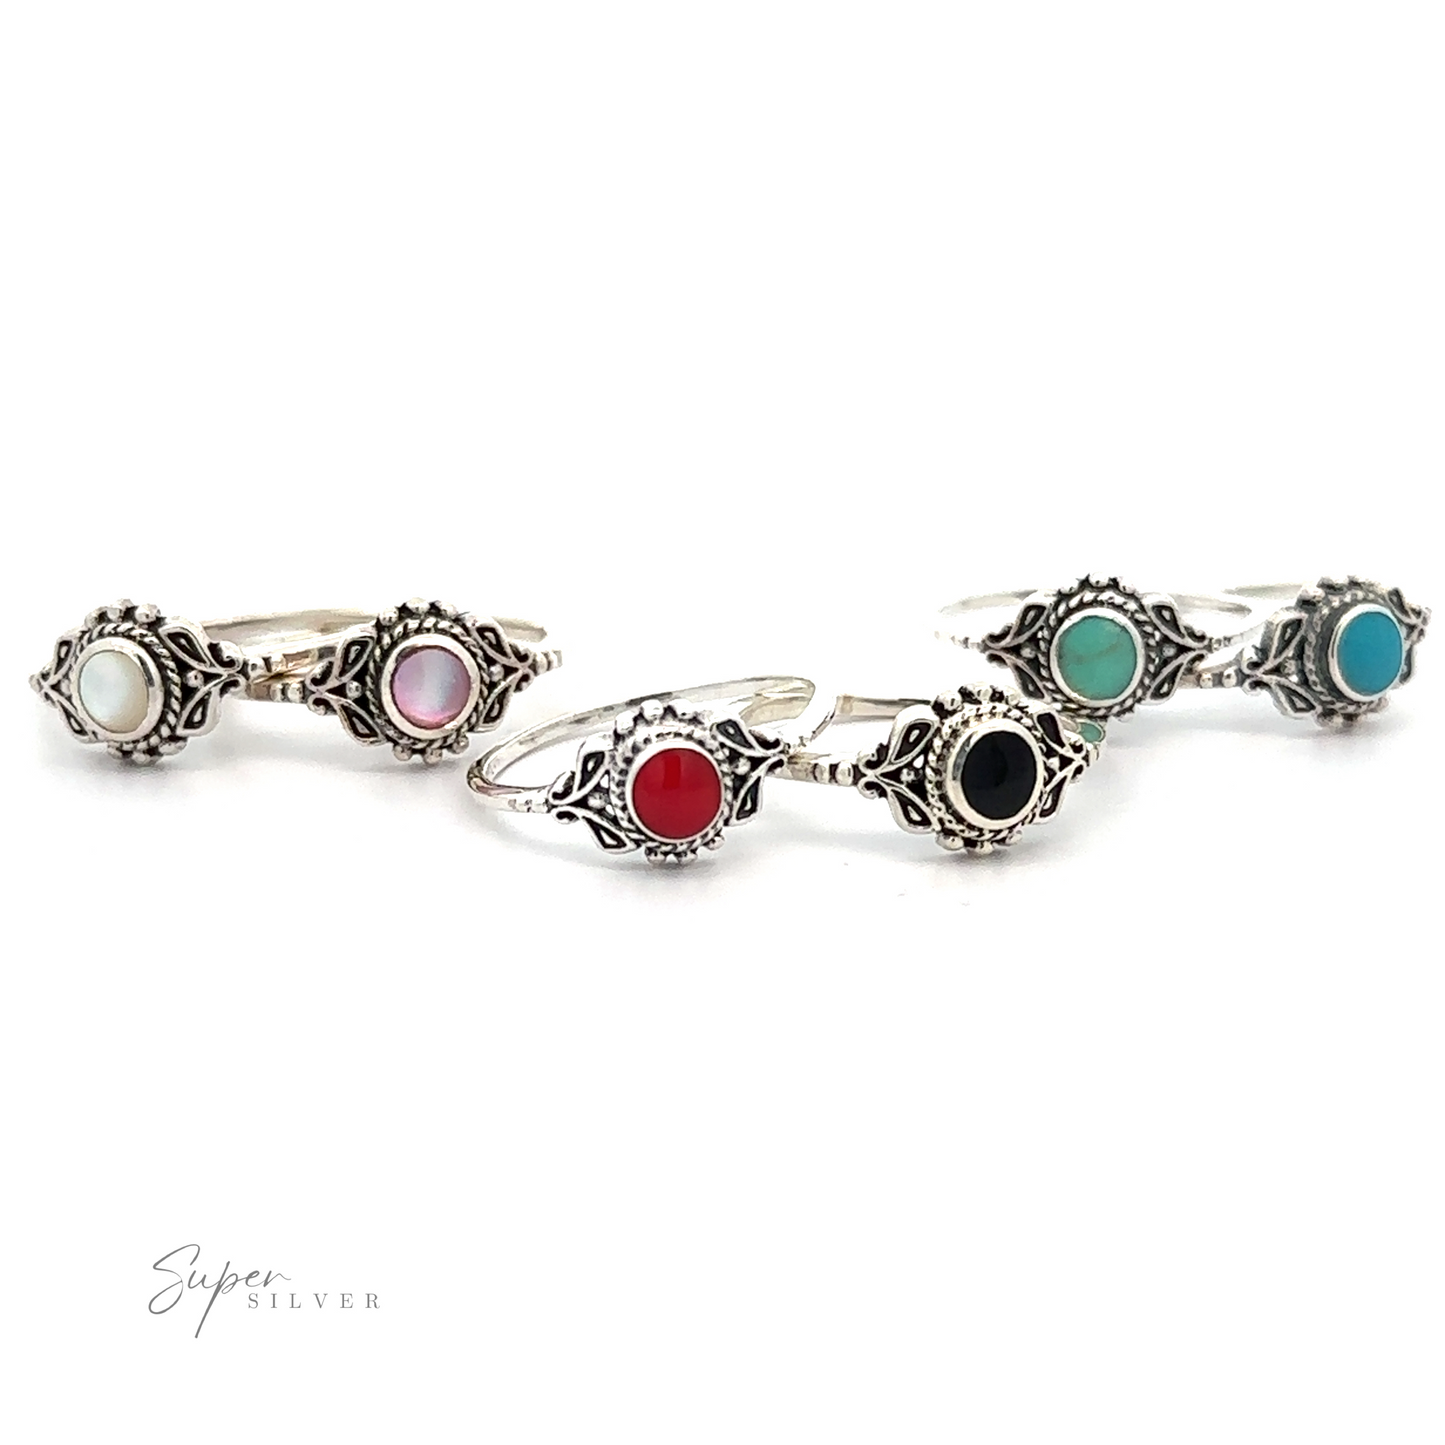 A set of Dainty Inlaid Stone Rings with Filigree in various colors.